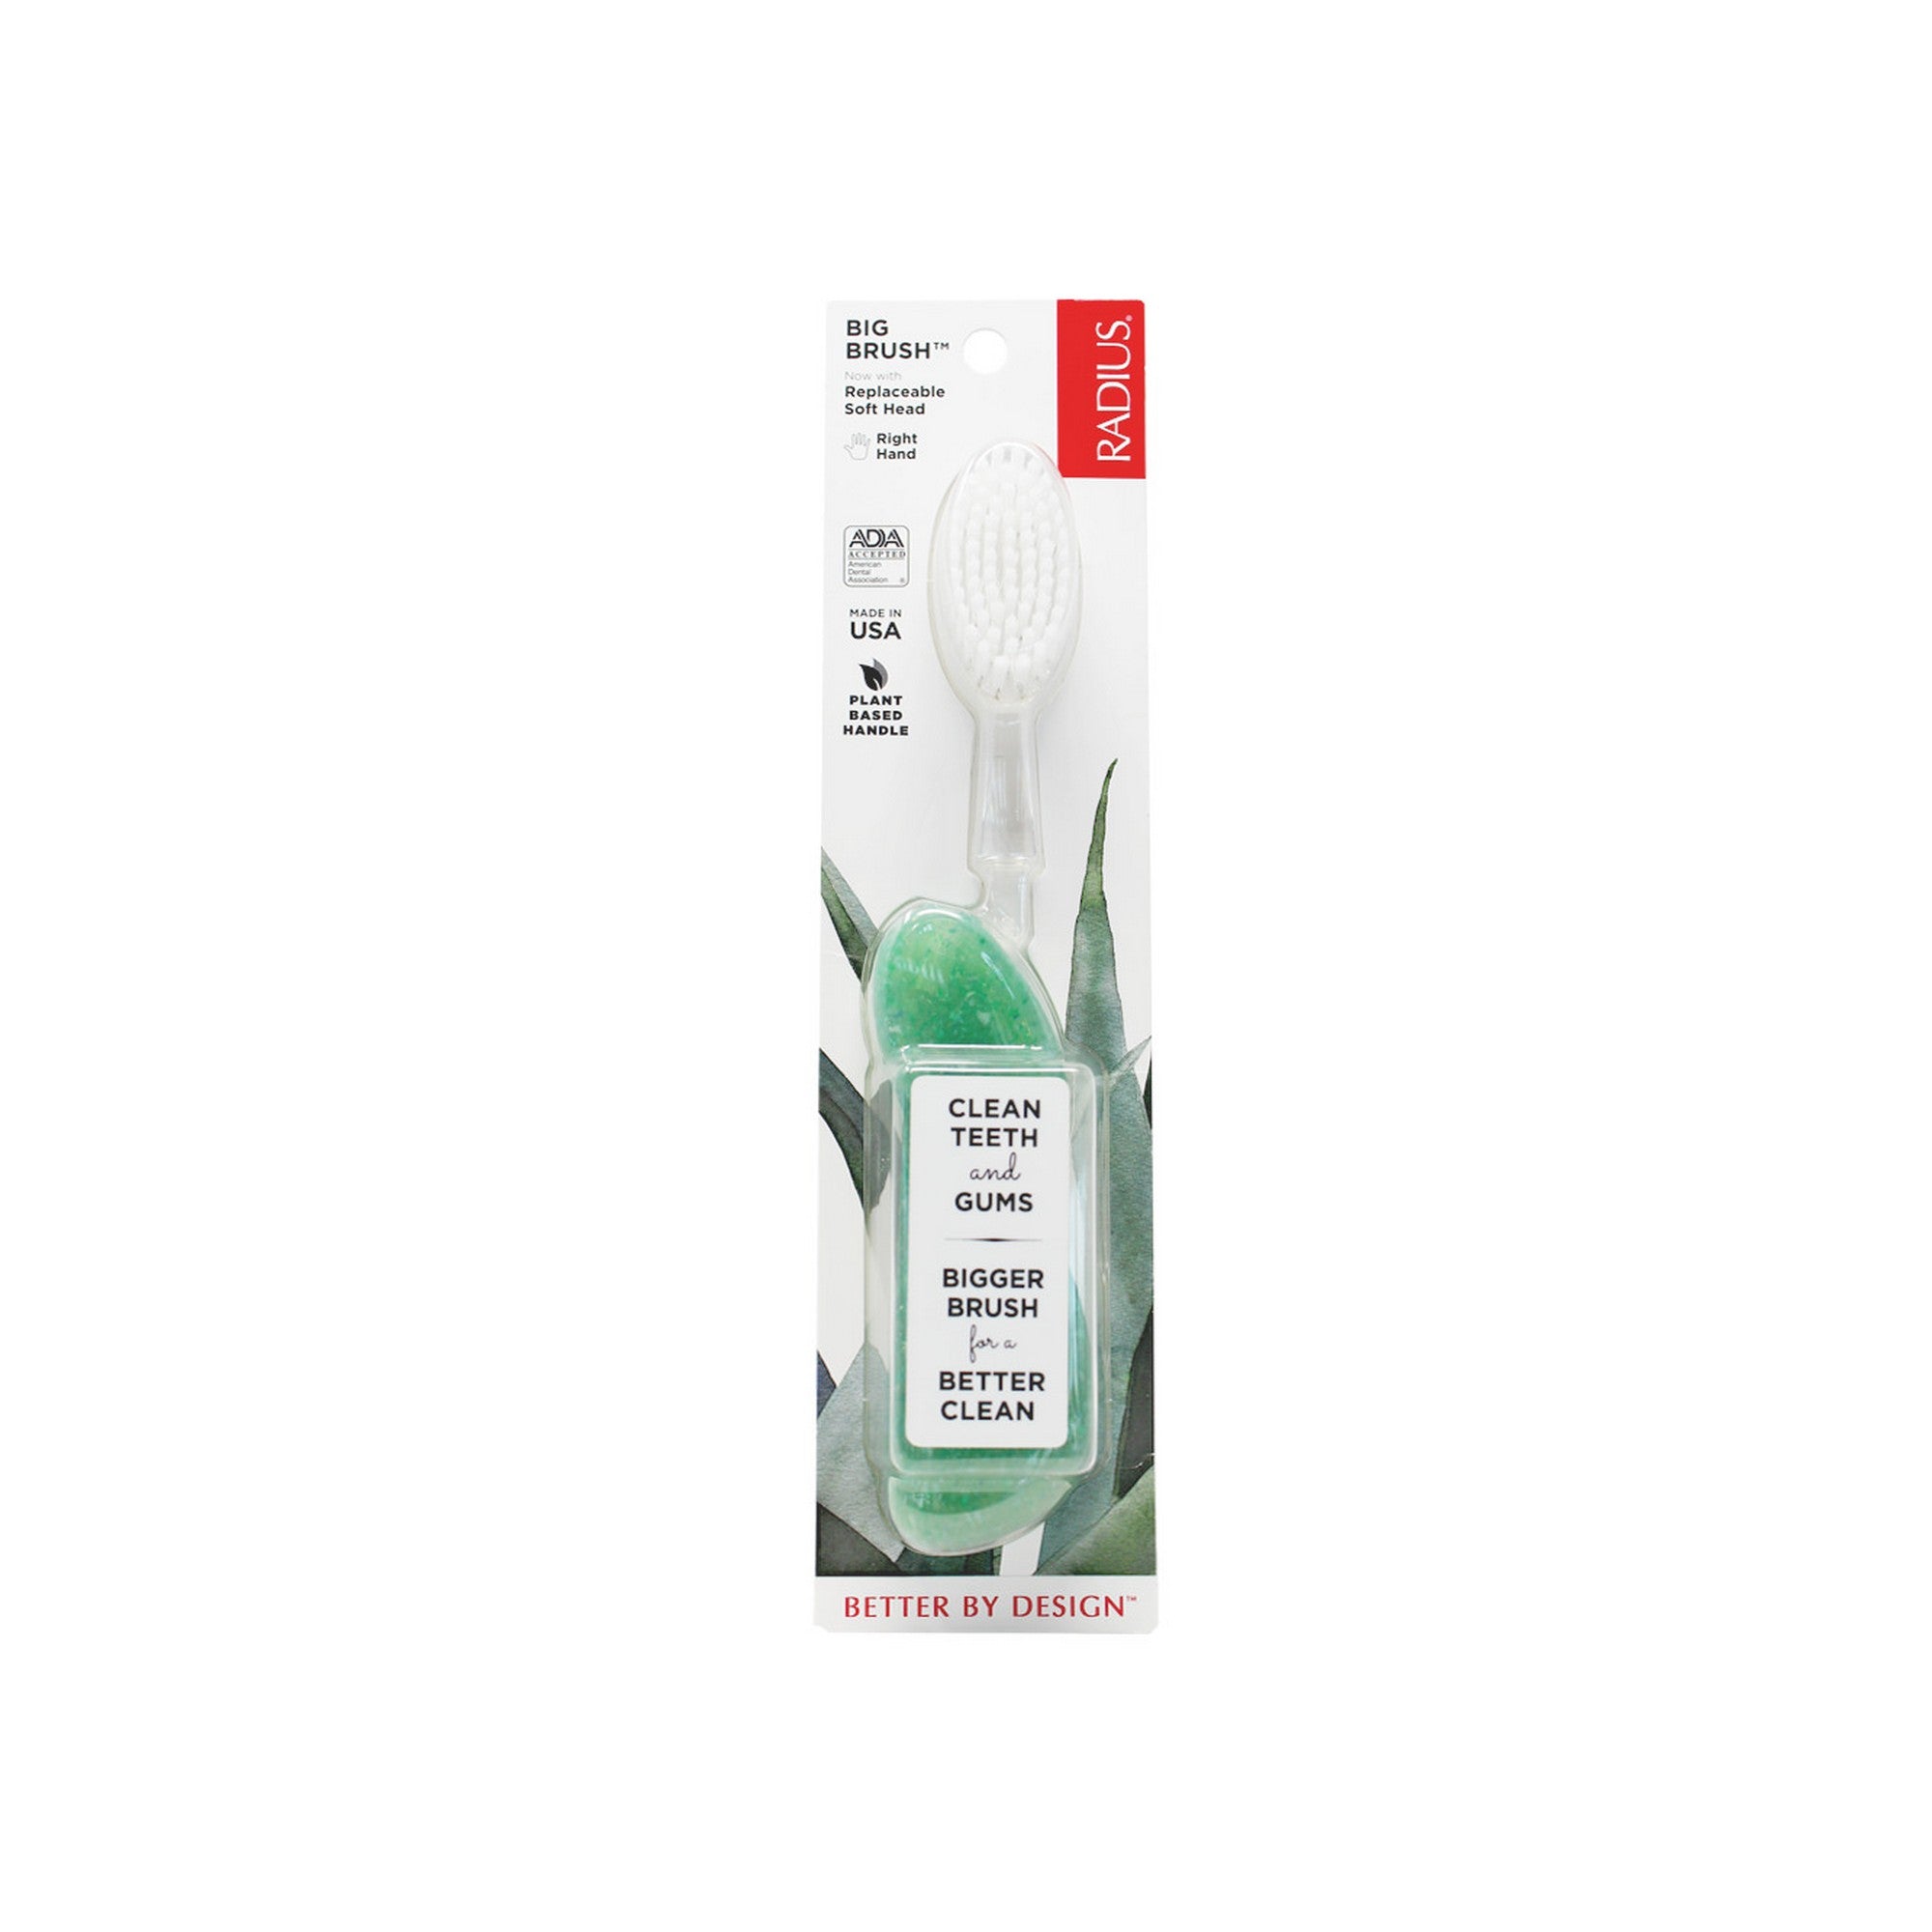 Radius Big Brush with Replaceable Head (Right-Handed) - Toothbrush for Adults